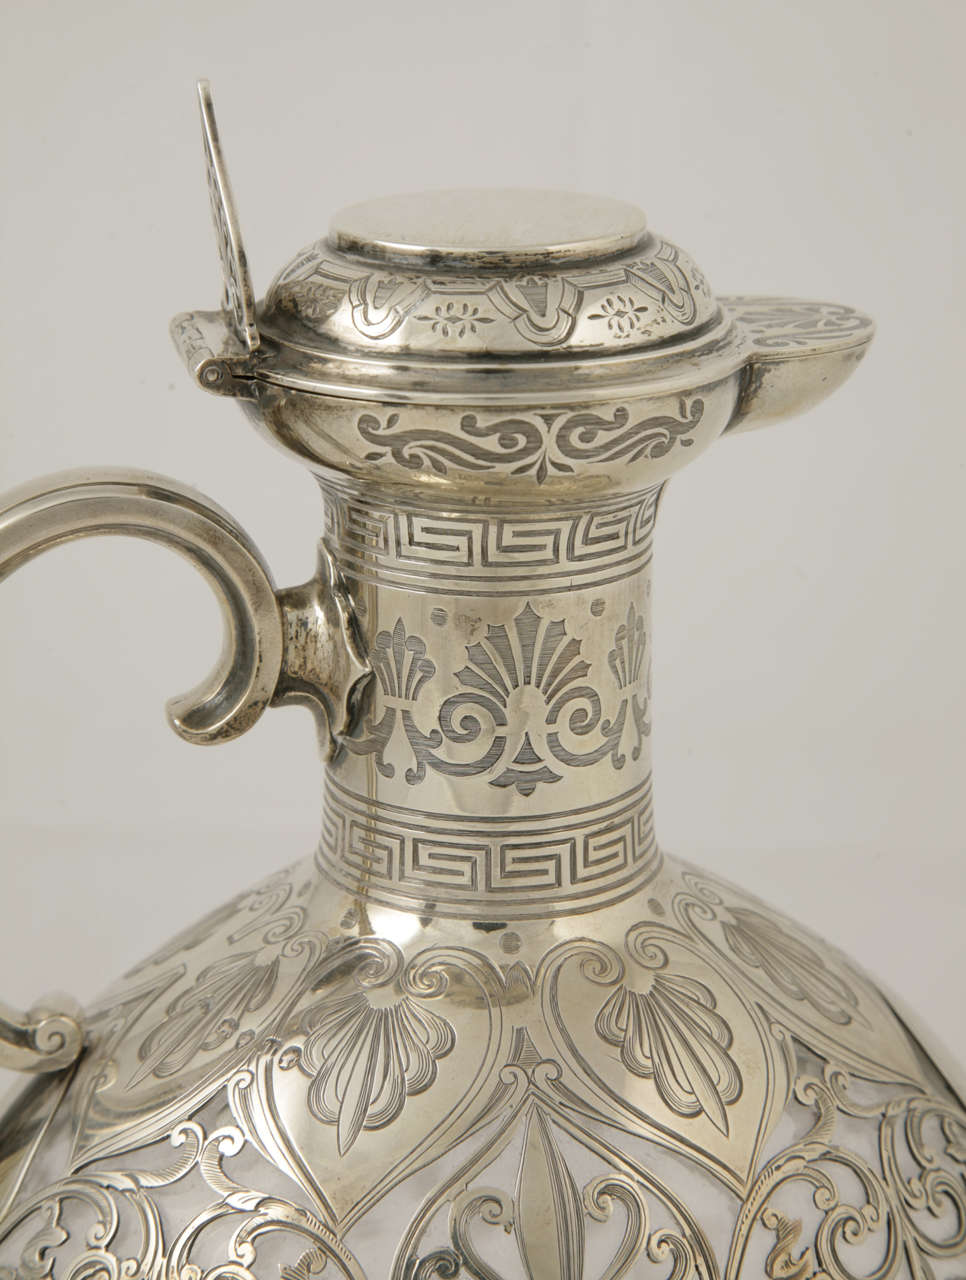 An antique English sterling silver and glass claret jug with star-cut design to glass and typical Victorian engraving on the silver.
It was made by George Fox of London in 1875.
Height is 25.5cms.